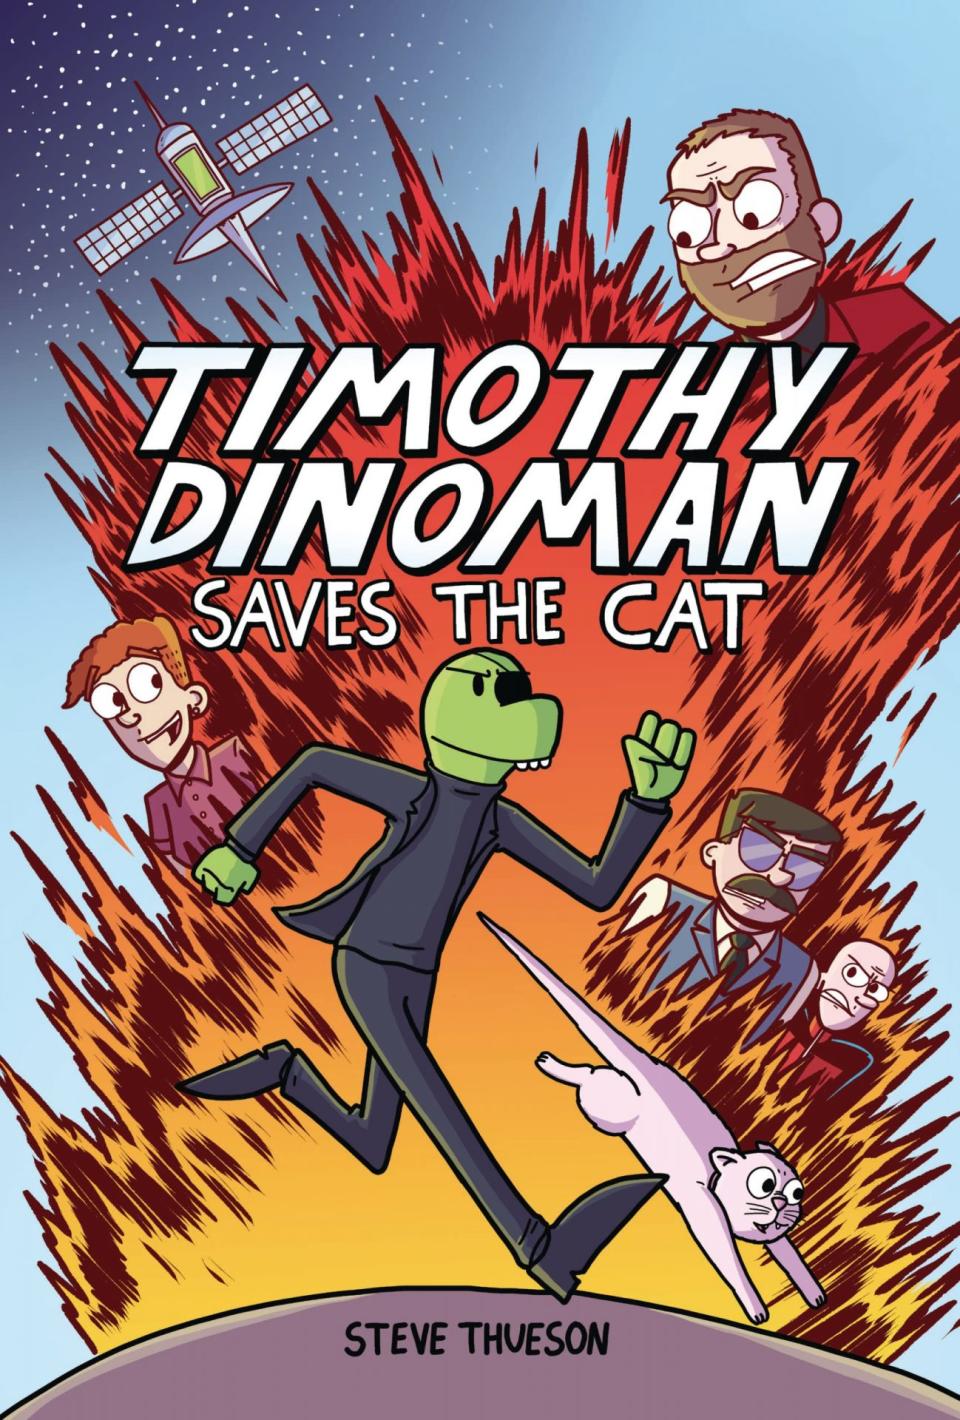 The cover for Timothy Dinoman shows the titular iganadon hero running from an explosion